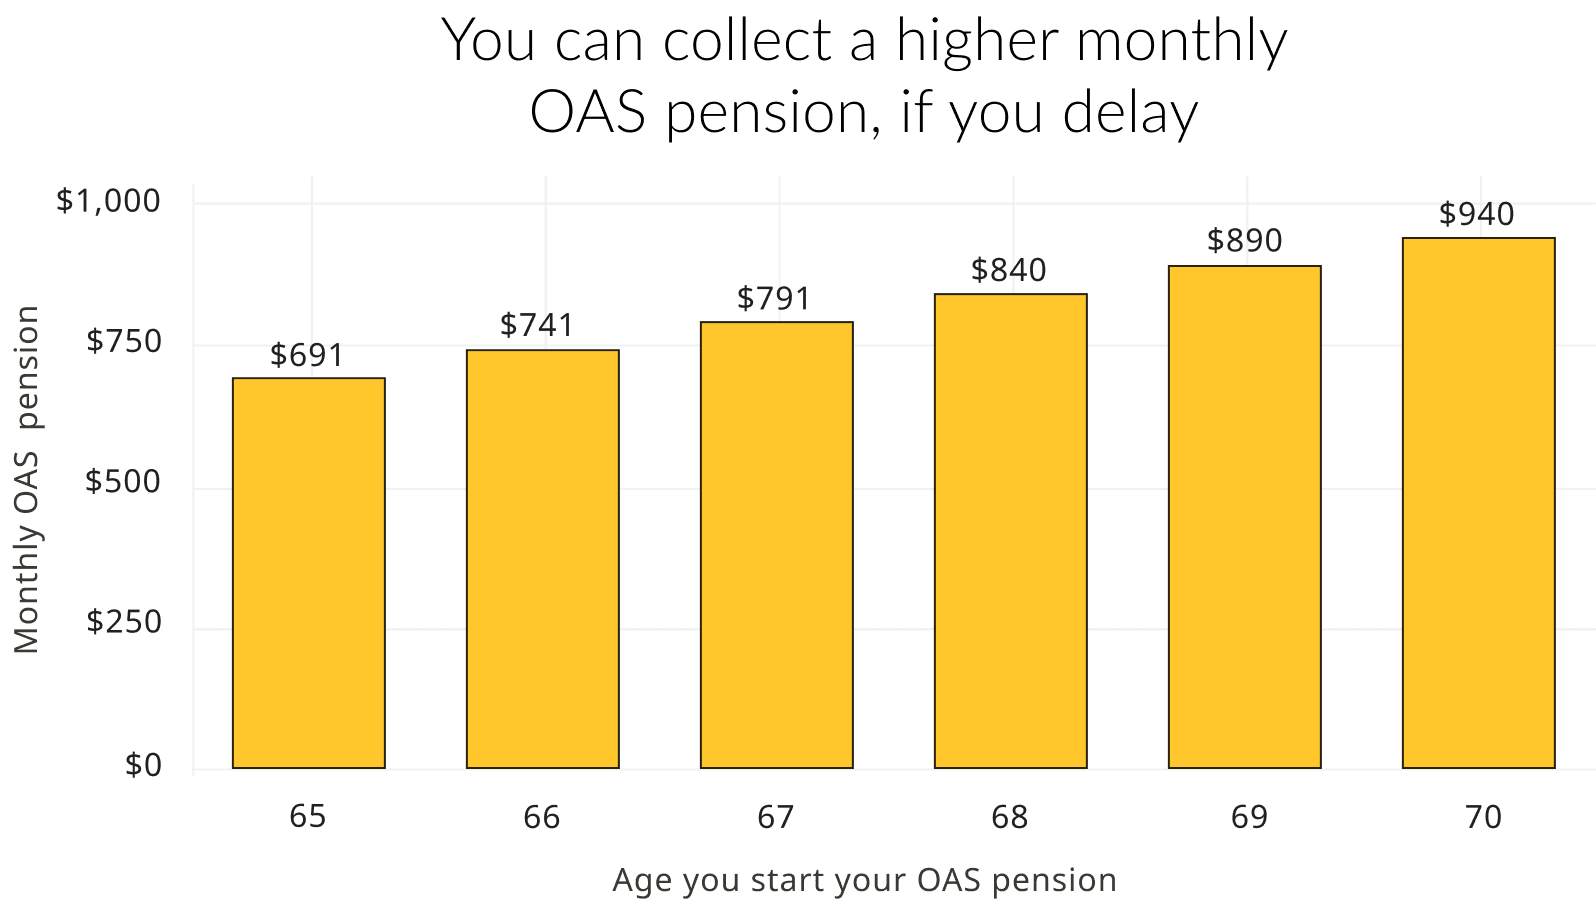 The chart shows changes in monthly OAS pension payments depending on what age you start. It shows that the longer you wait to start your pension, the more money you'll collect. You can begin your OAS pension at age 65, or delay it until age 70 for the largest amount. Your OAS pension will increase by 36%, if started at age 70 instead of 65. This chart is an illustration of the pension increase with age and uses the monthly OAS pension amount for June 2023.